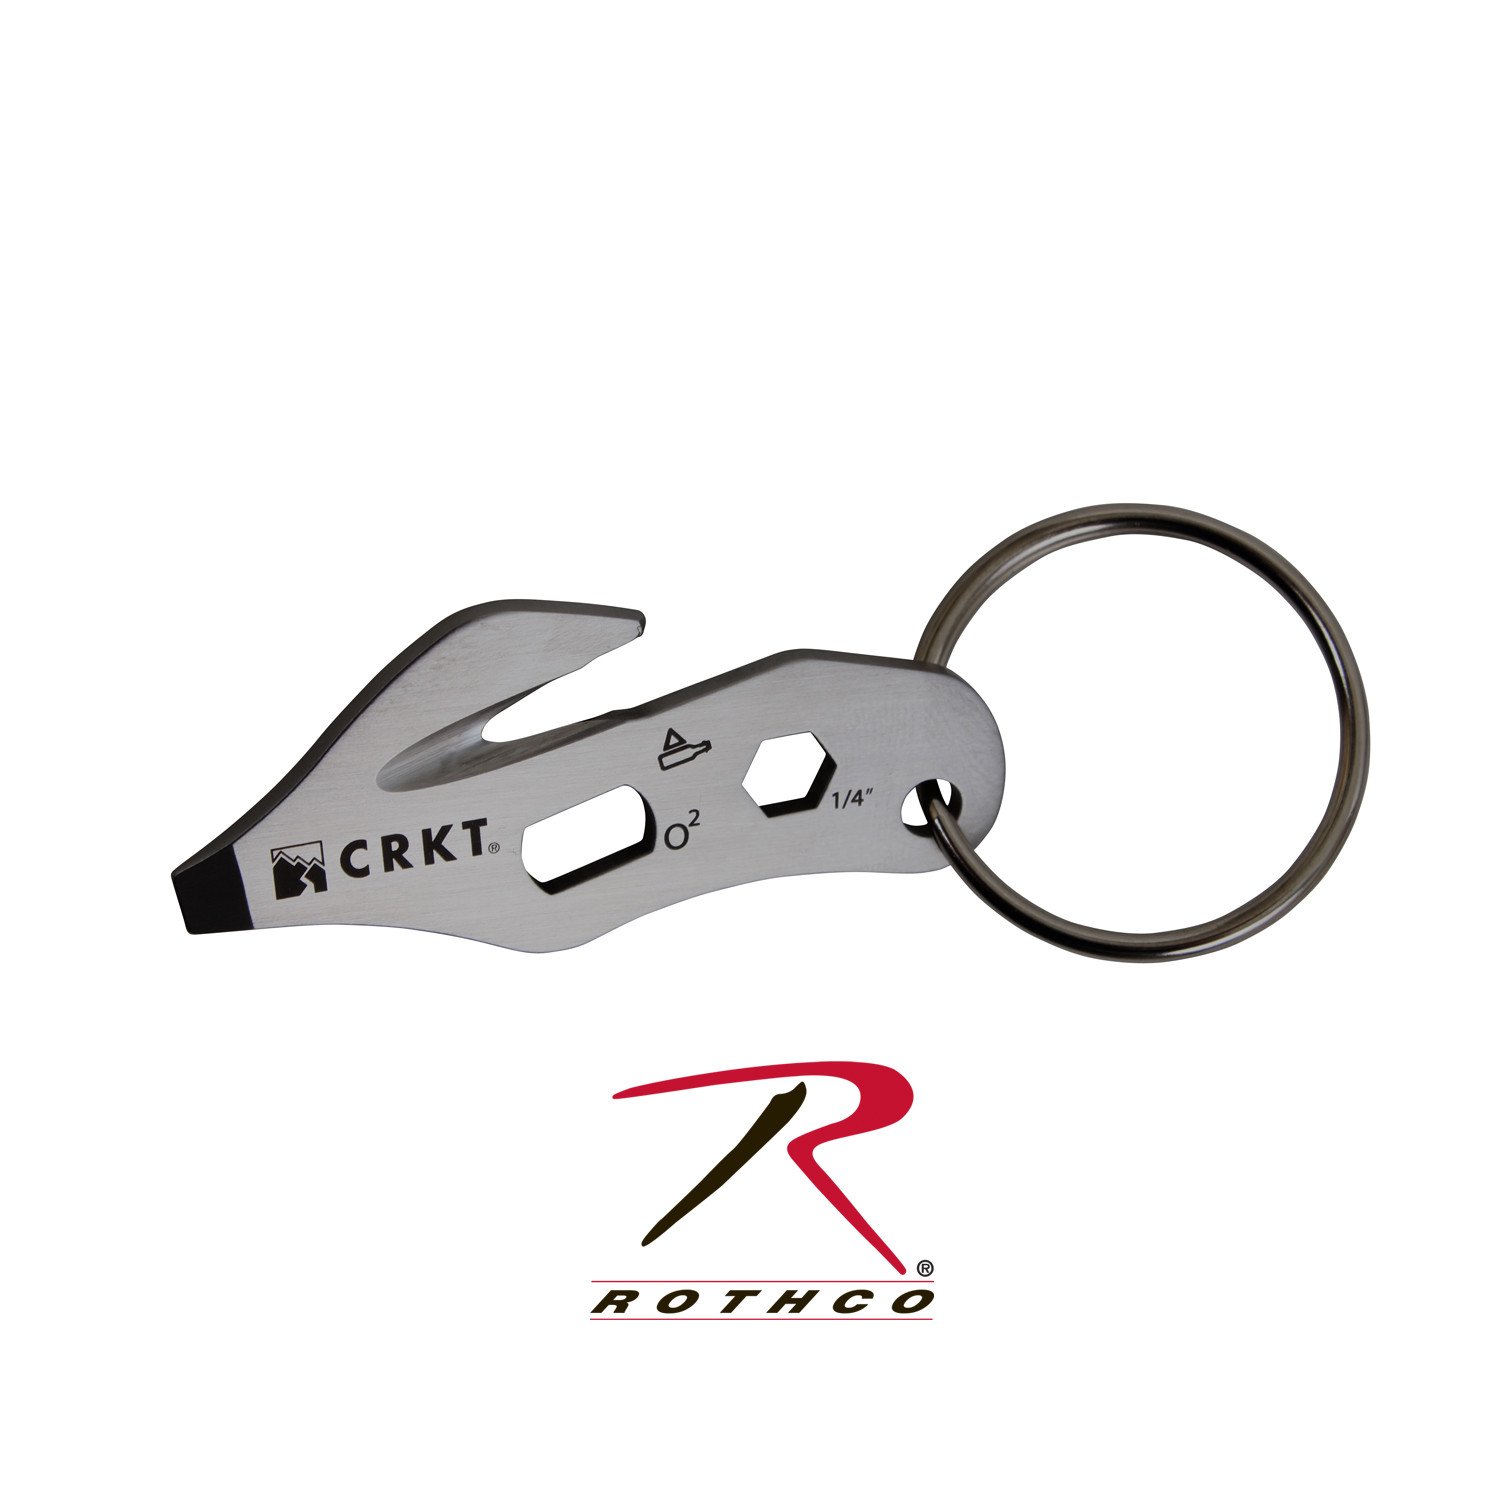 Colombia River Crkt Kert/Key Ring Emergency Rescue Tool - Rothco Item 3337